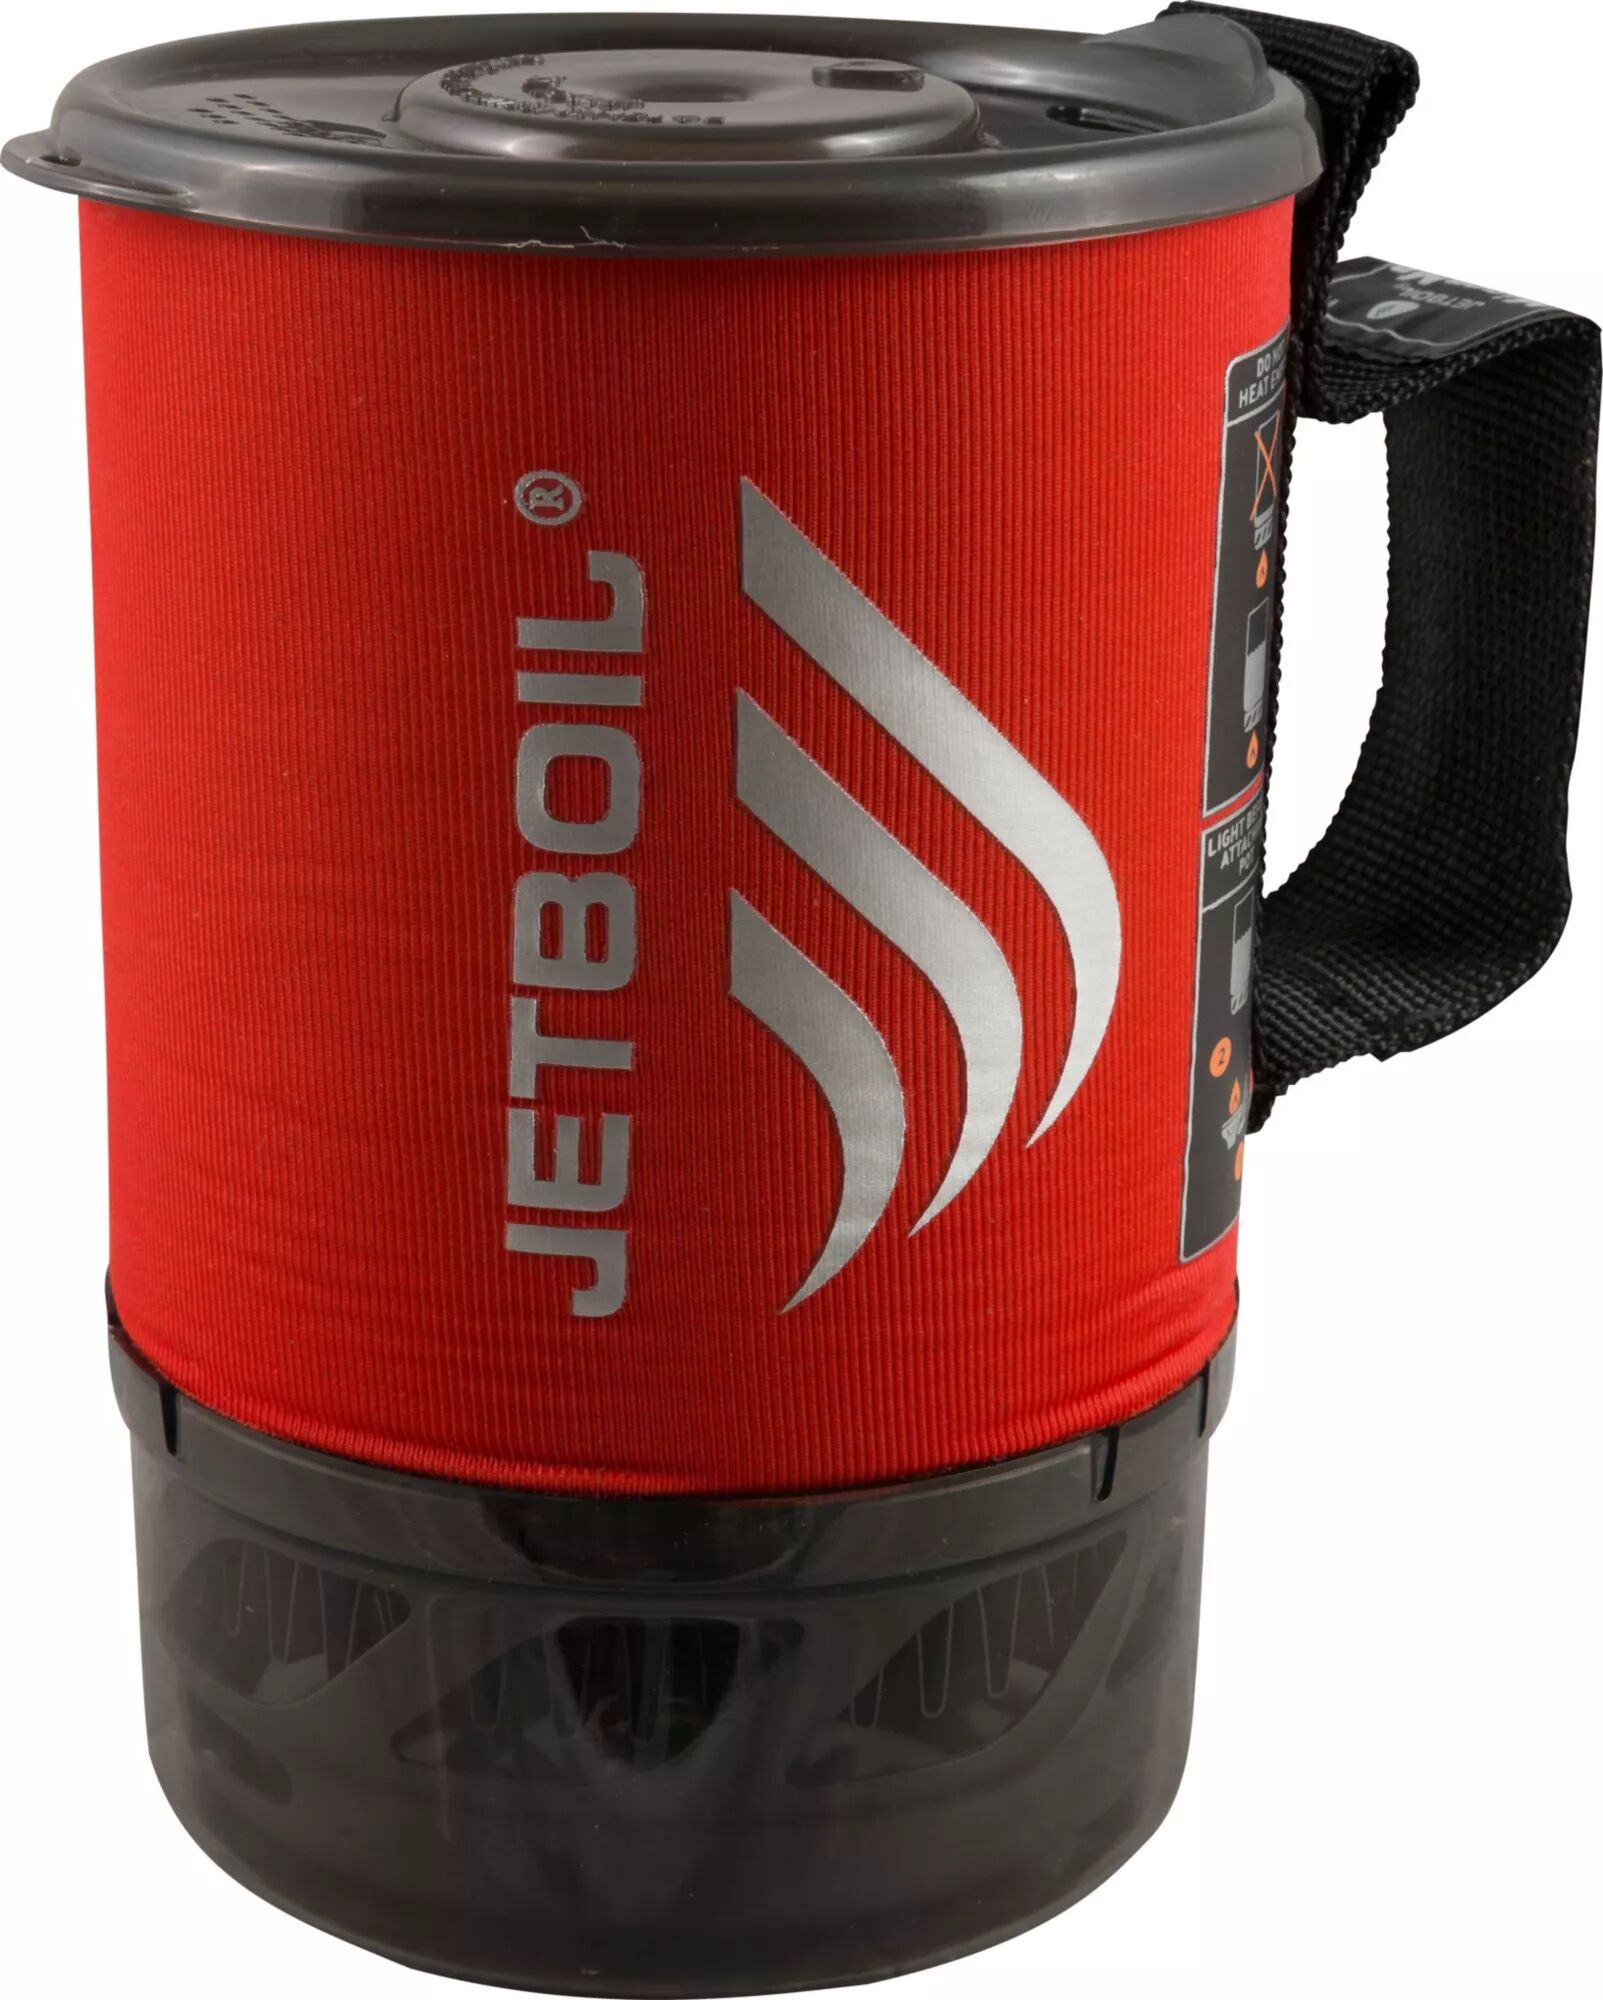 Jetboil MicroMo Cooking System, Red